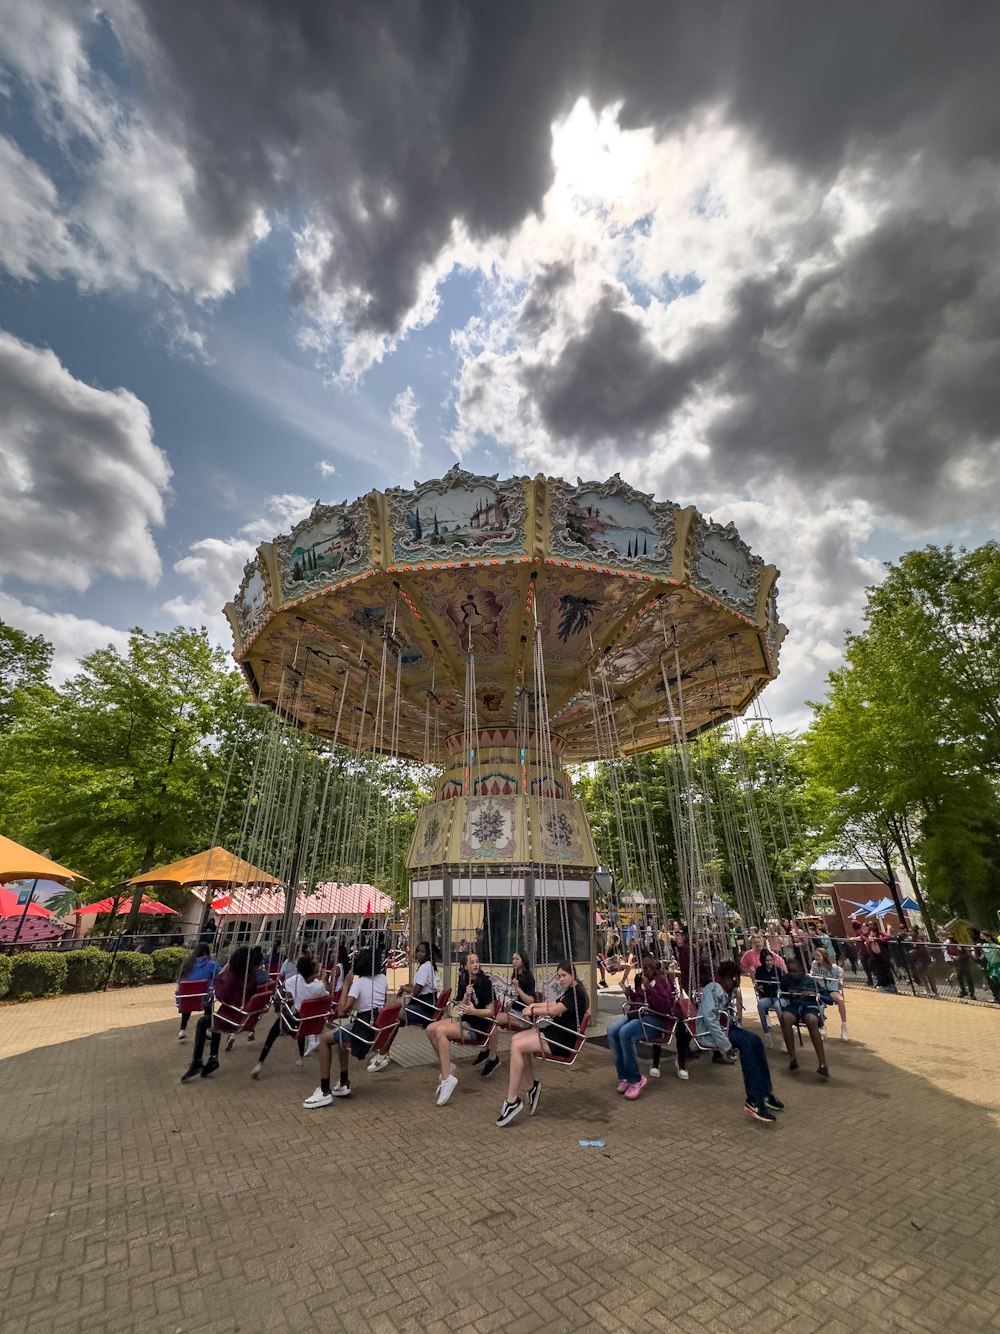 a group of people sitting around a merry go round